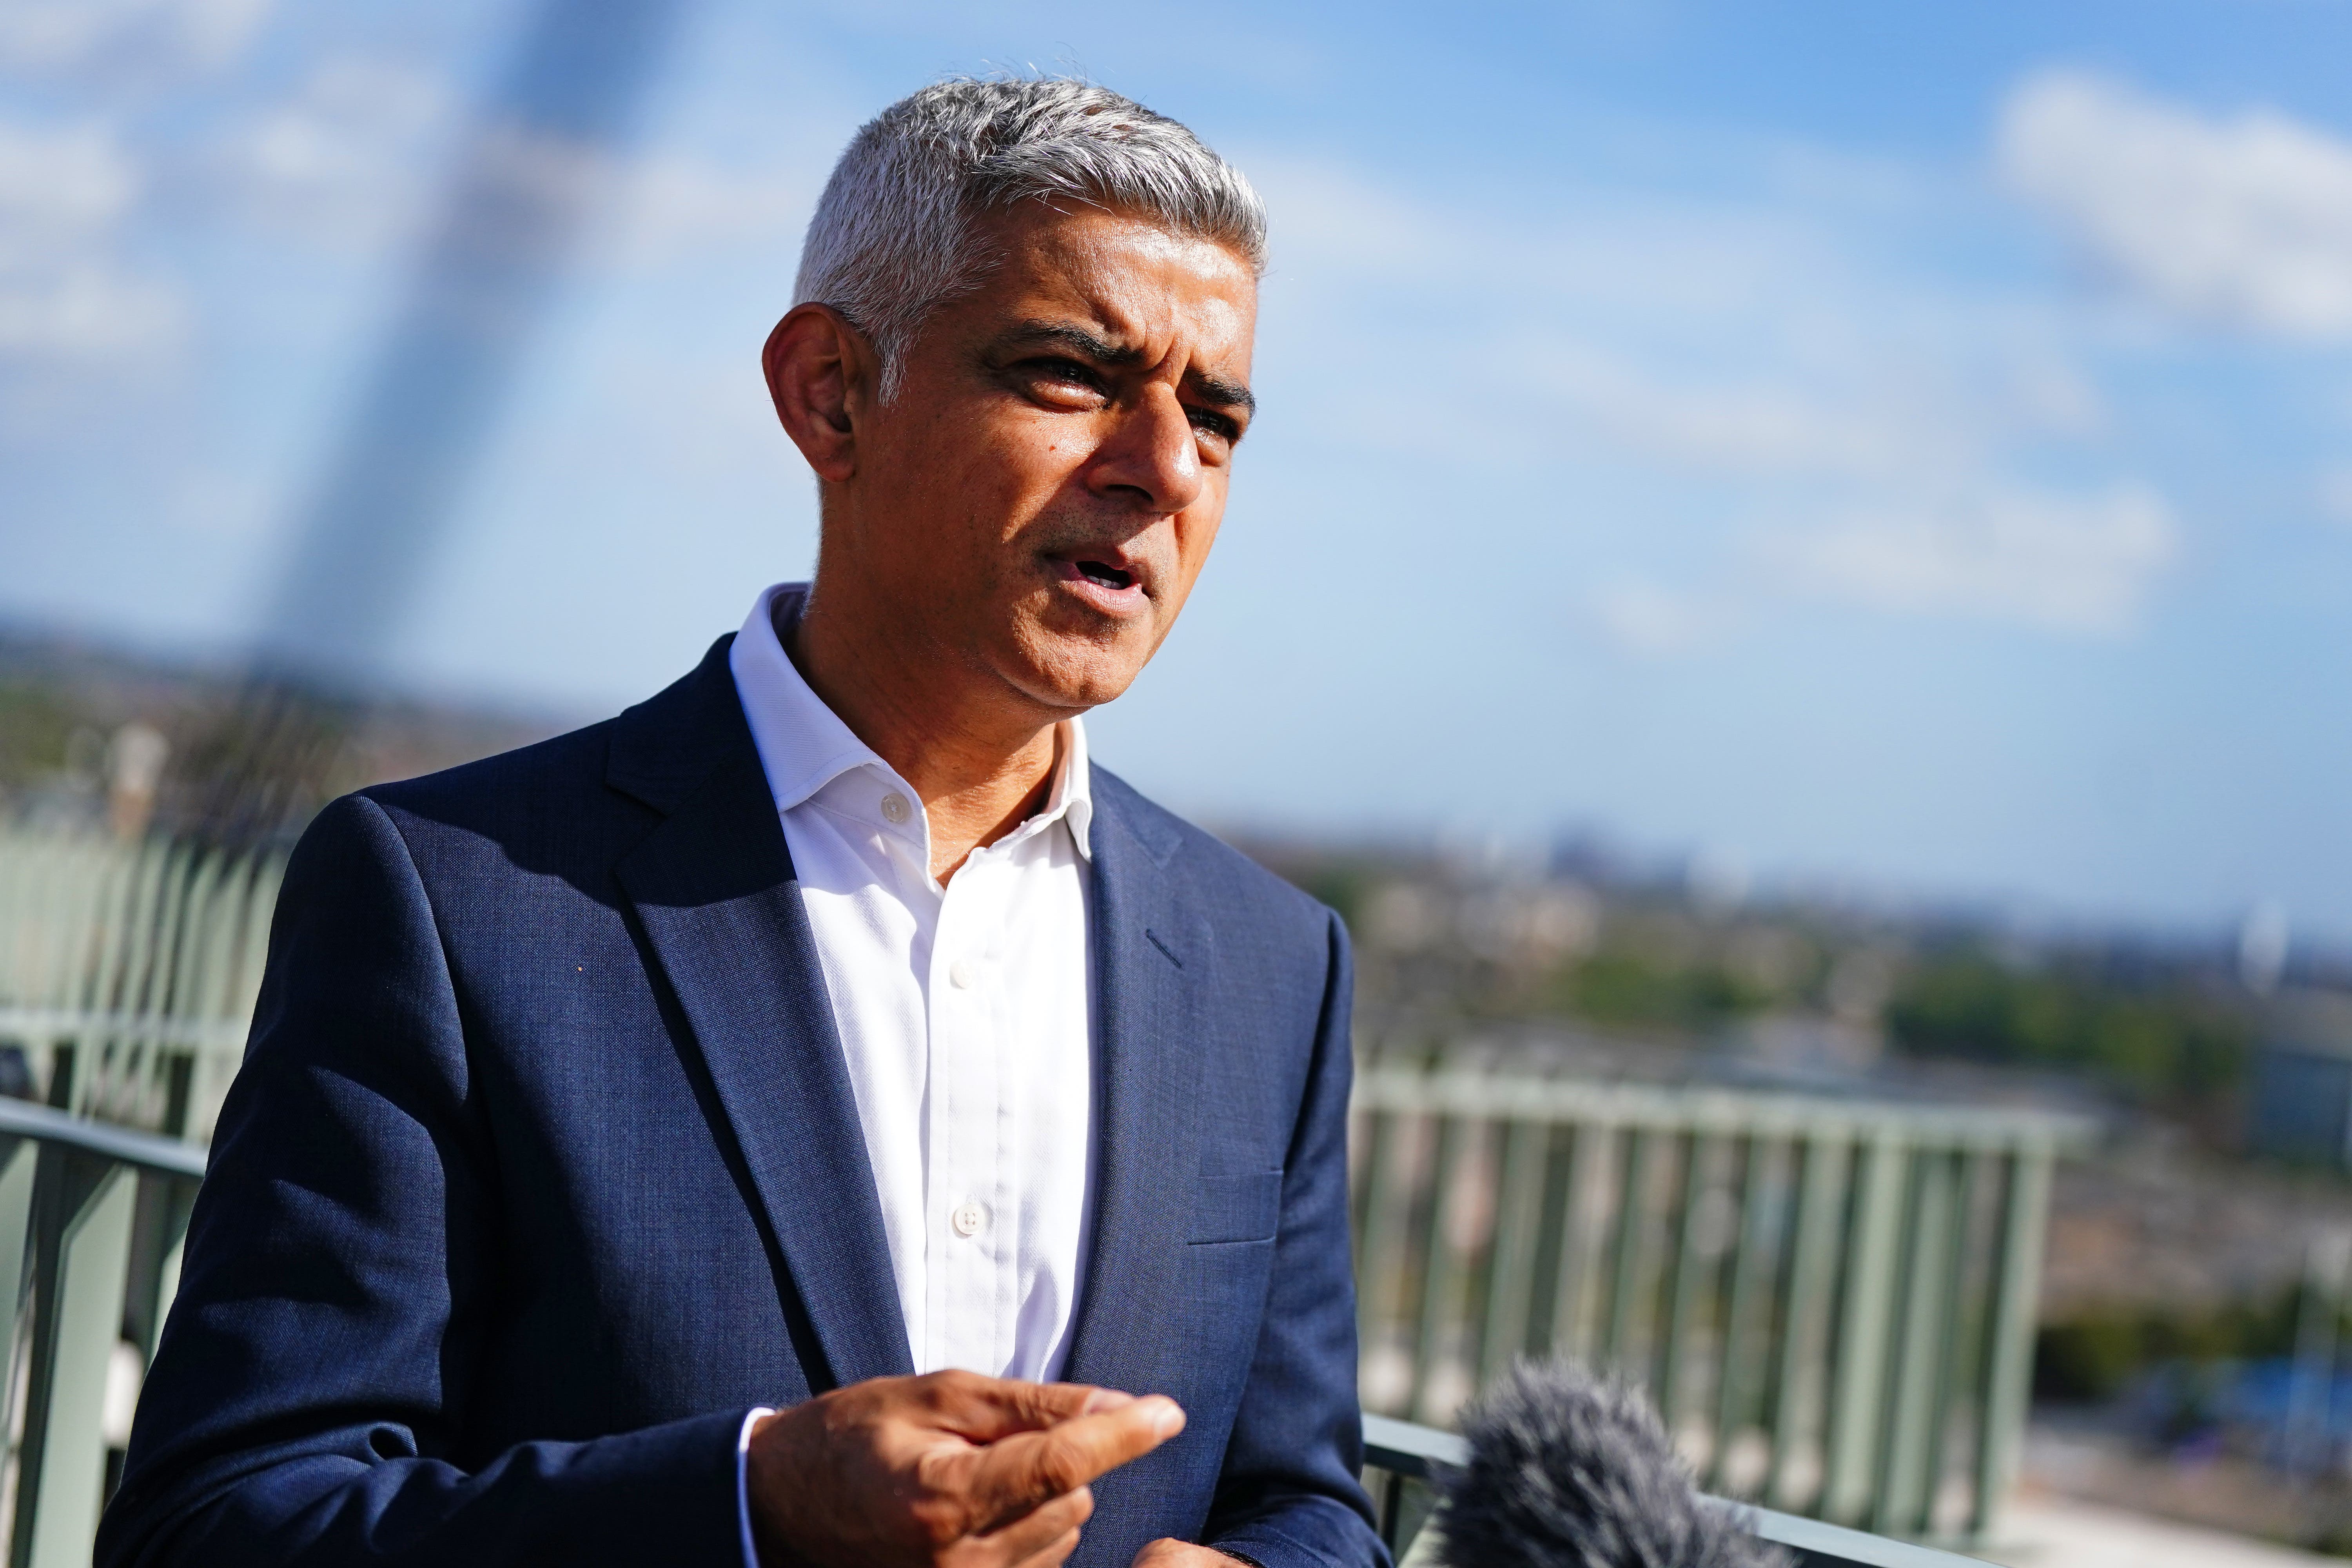 Sadiq Khan is seeking a third term as London’s mayor, but said he was ‘under no illusions’ and could lose to the Conservatives’ Susan Hall (Victoria Jones/PA)